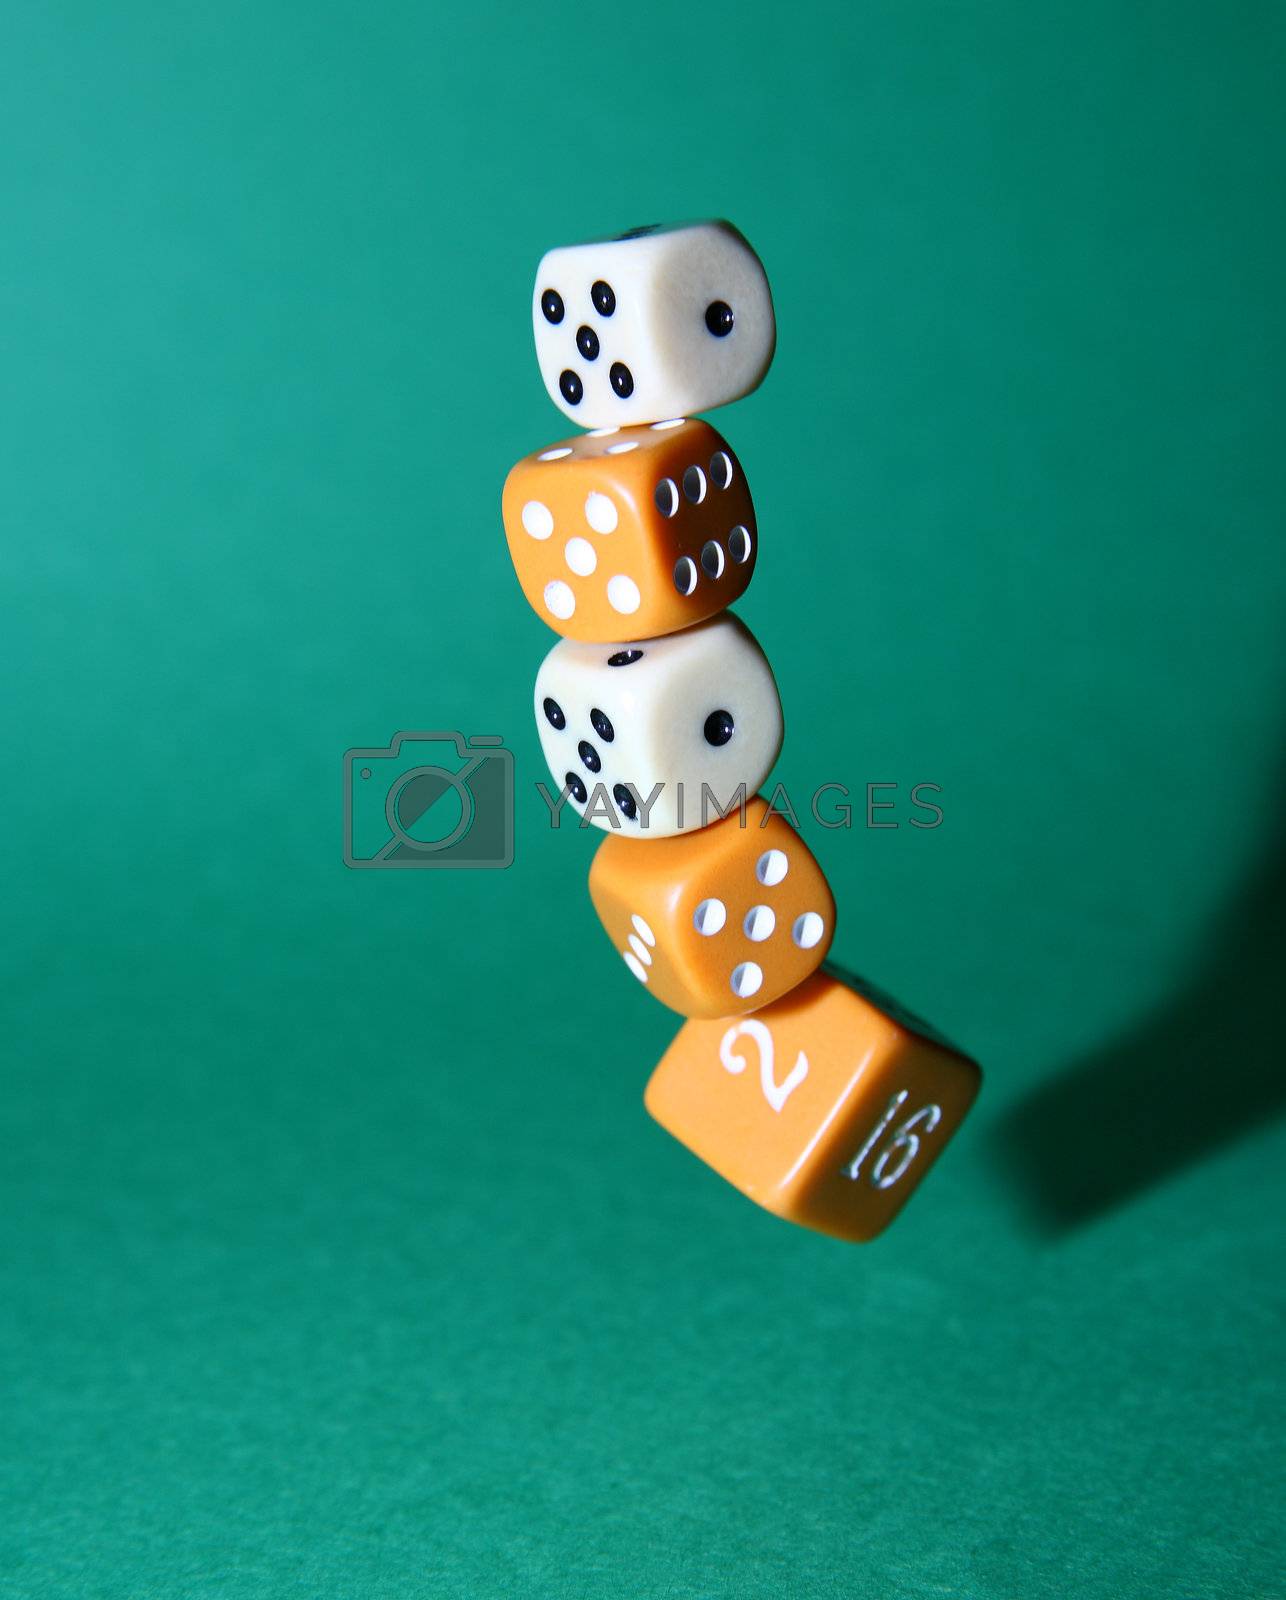 Royalty free image of Dropping Dice by dnfphoto